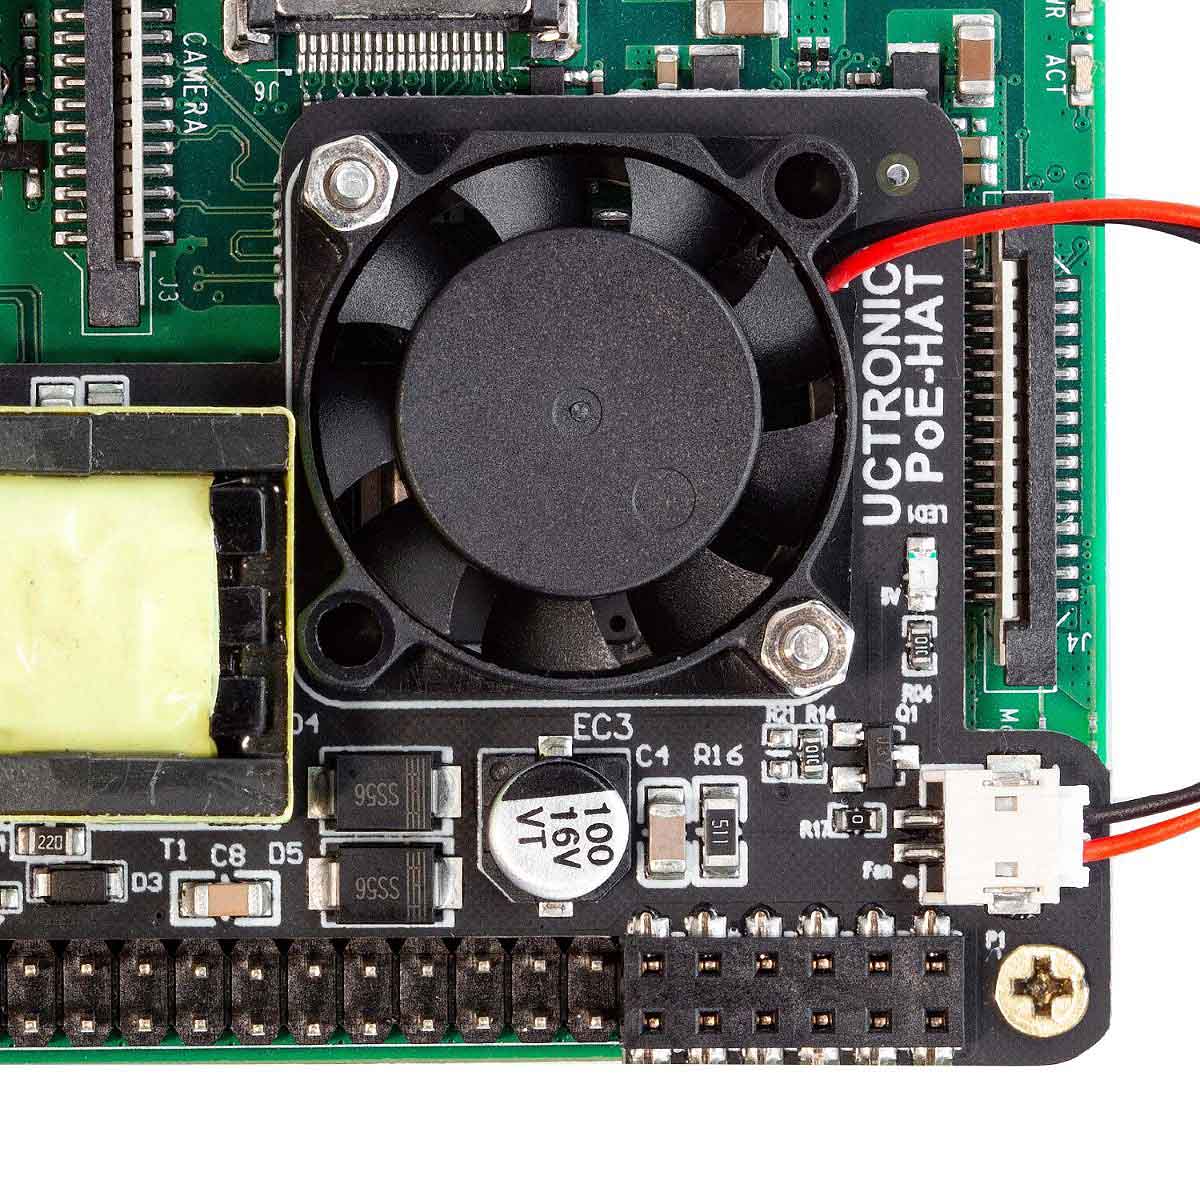 Mini Power over Ethernet (PoE) Expansion Board for Raspberry Pi 4 - With Fan - The Pi Hut